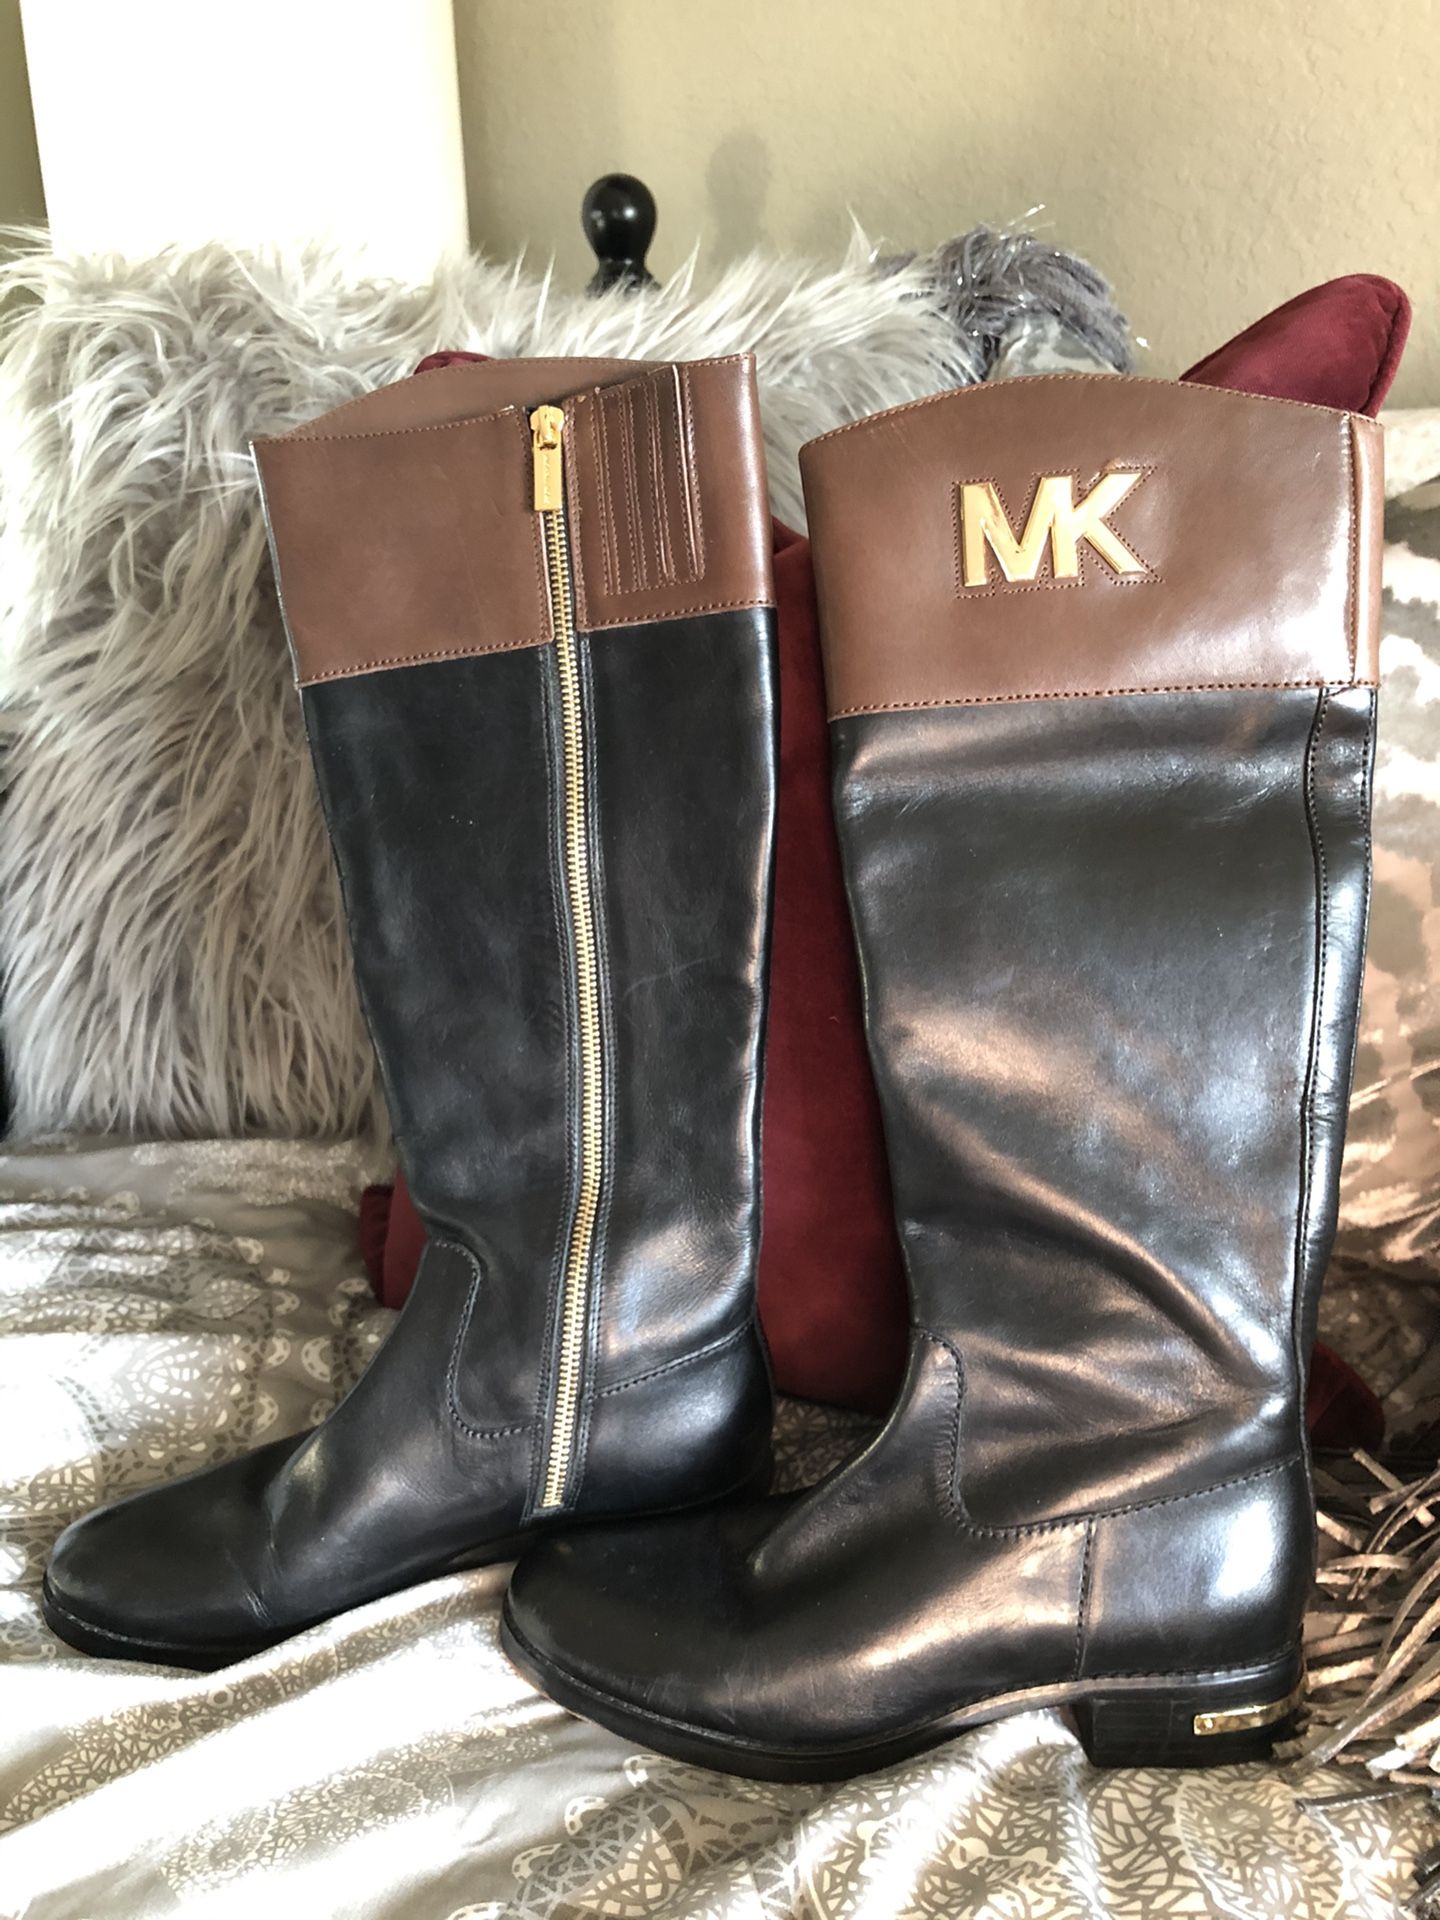 Michael Kors High Rise Riding Style Boots